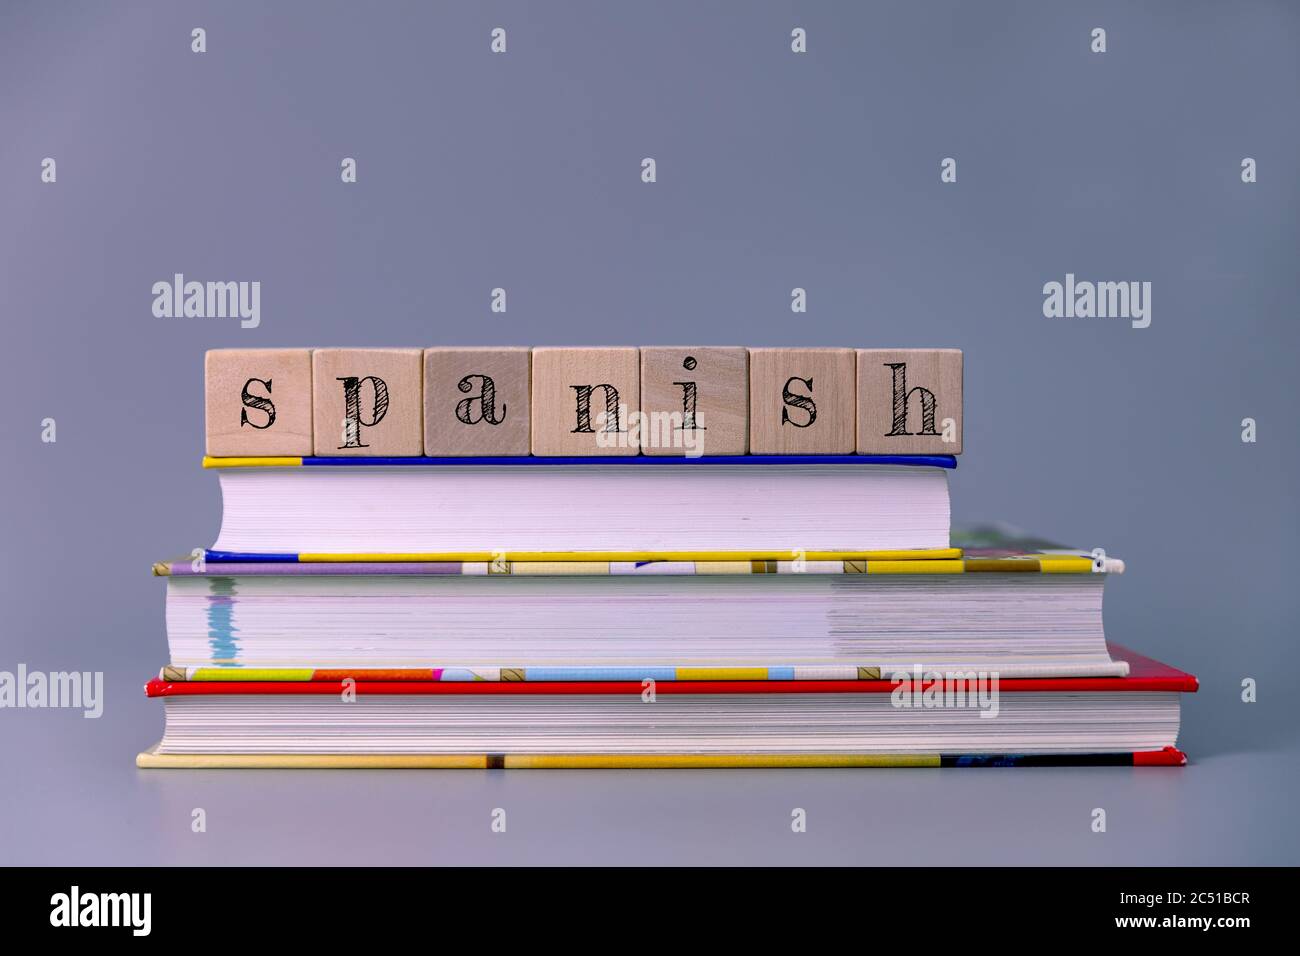 spanish language course and learning concept. stack of books with wooden blocks Stock Photo